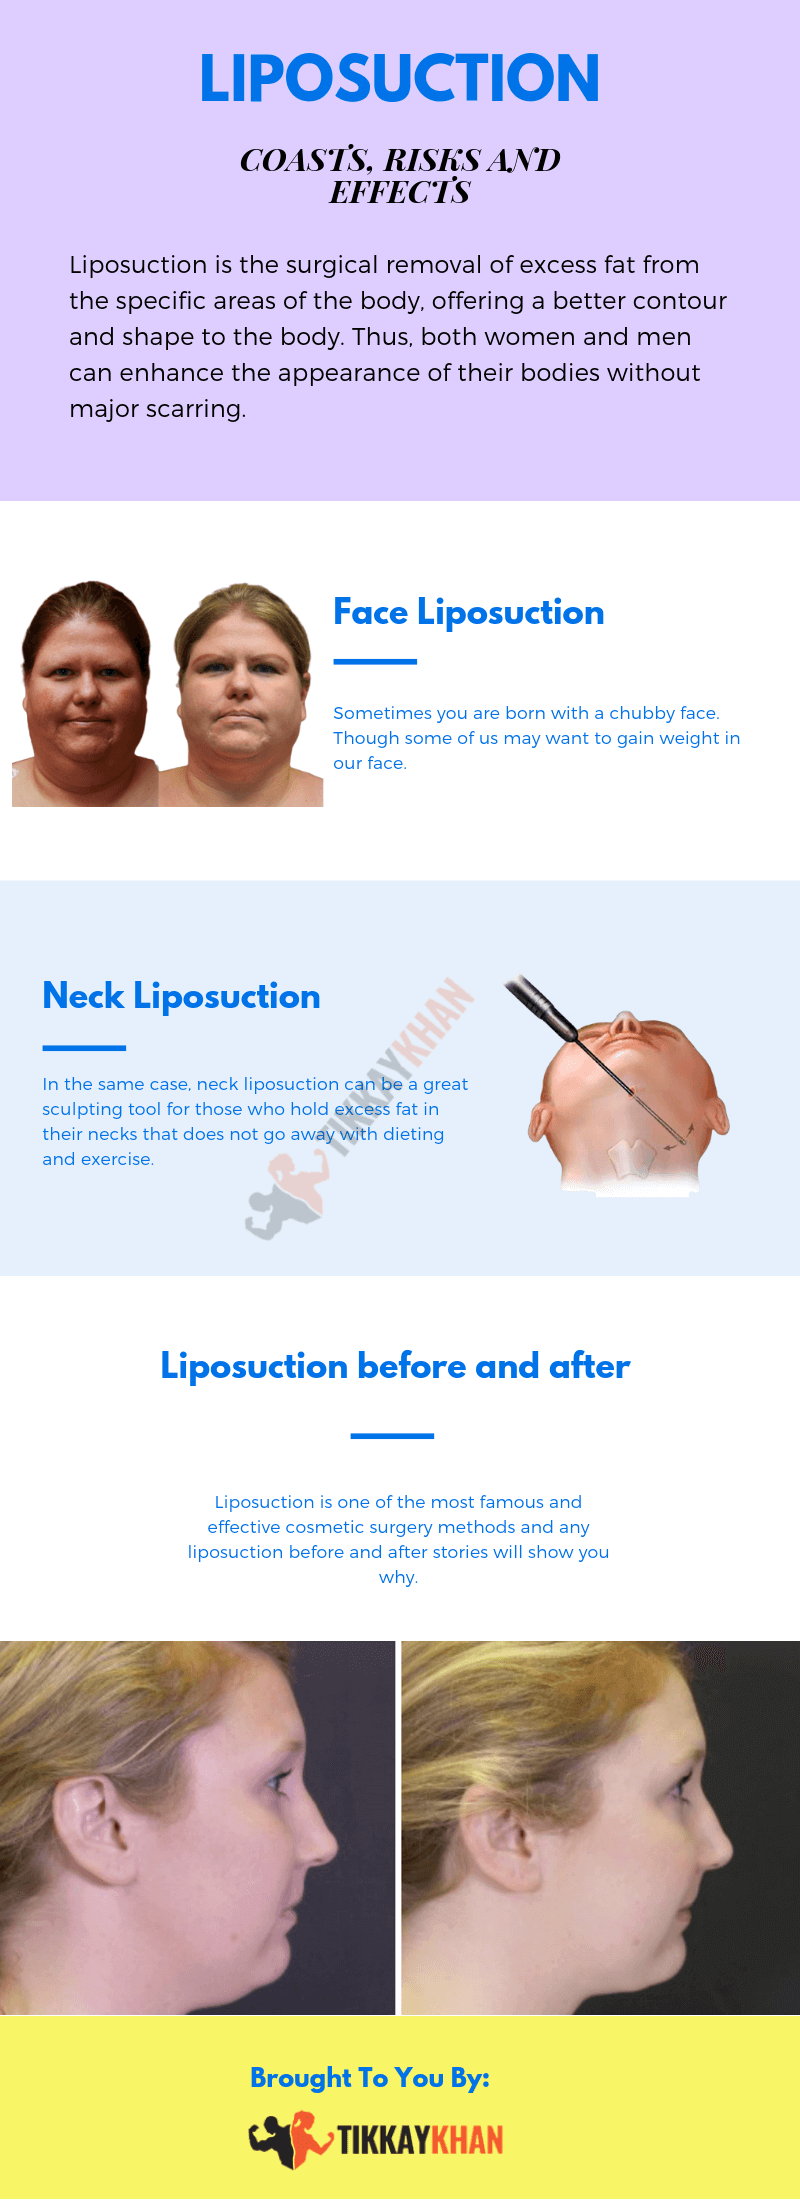 Liposuction Infographic by TikkayKhan